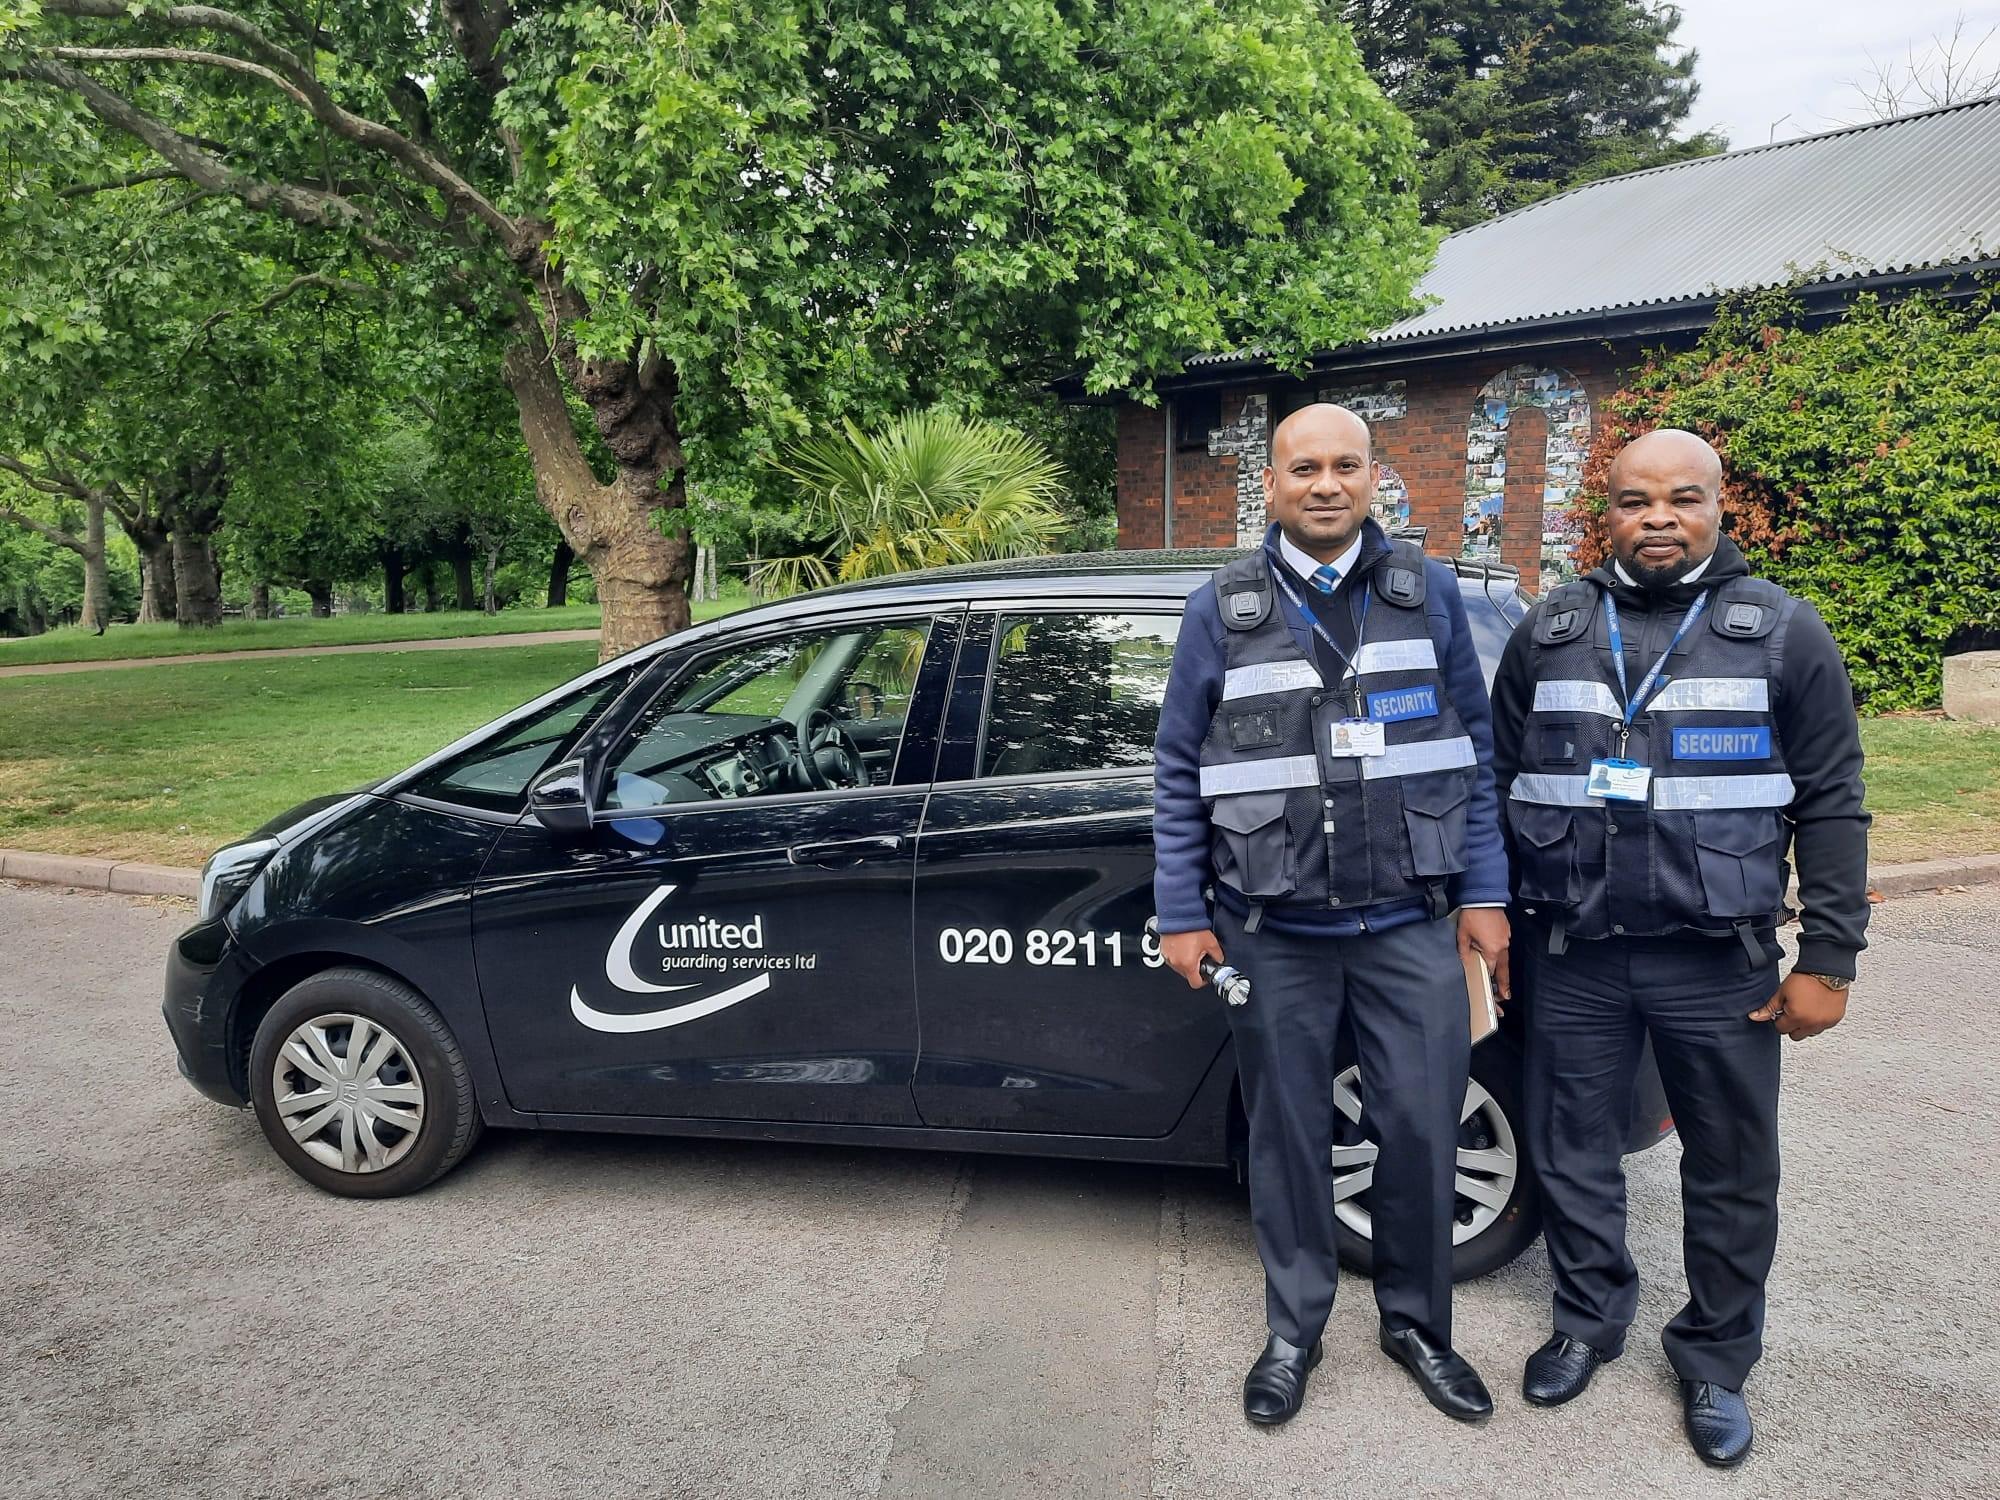 Two wardens will now be patrolling the park between 3pm and 10pm as part of a 14-week trial period for these additional community safety measures.